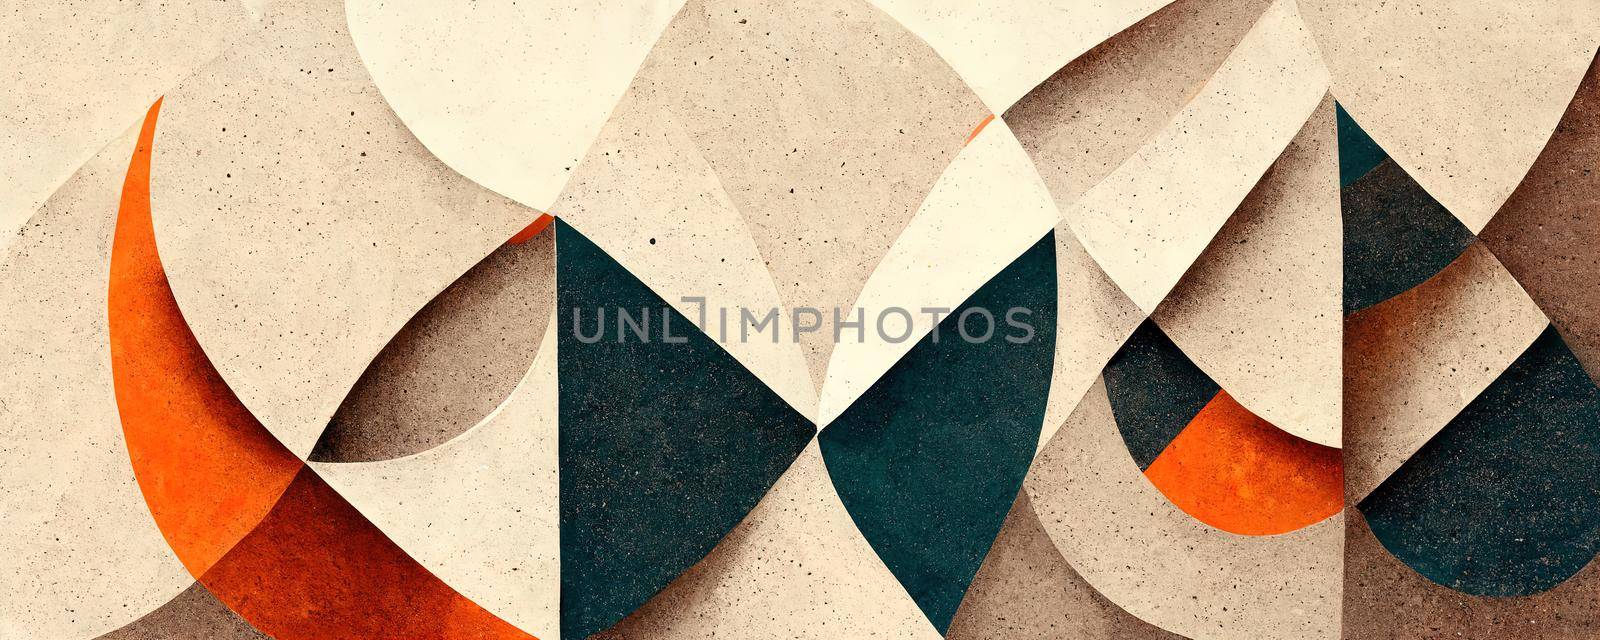 Colorful abstract wallpaper texture background illustration.